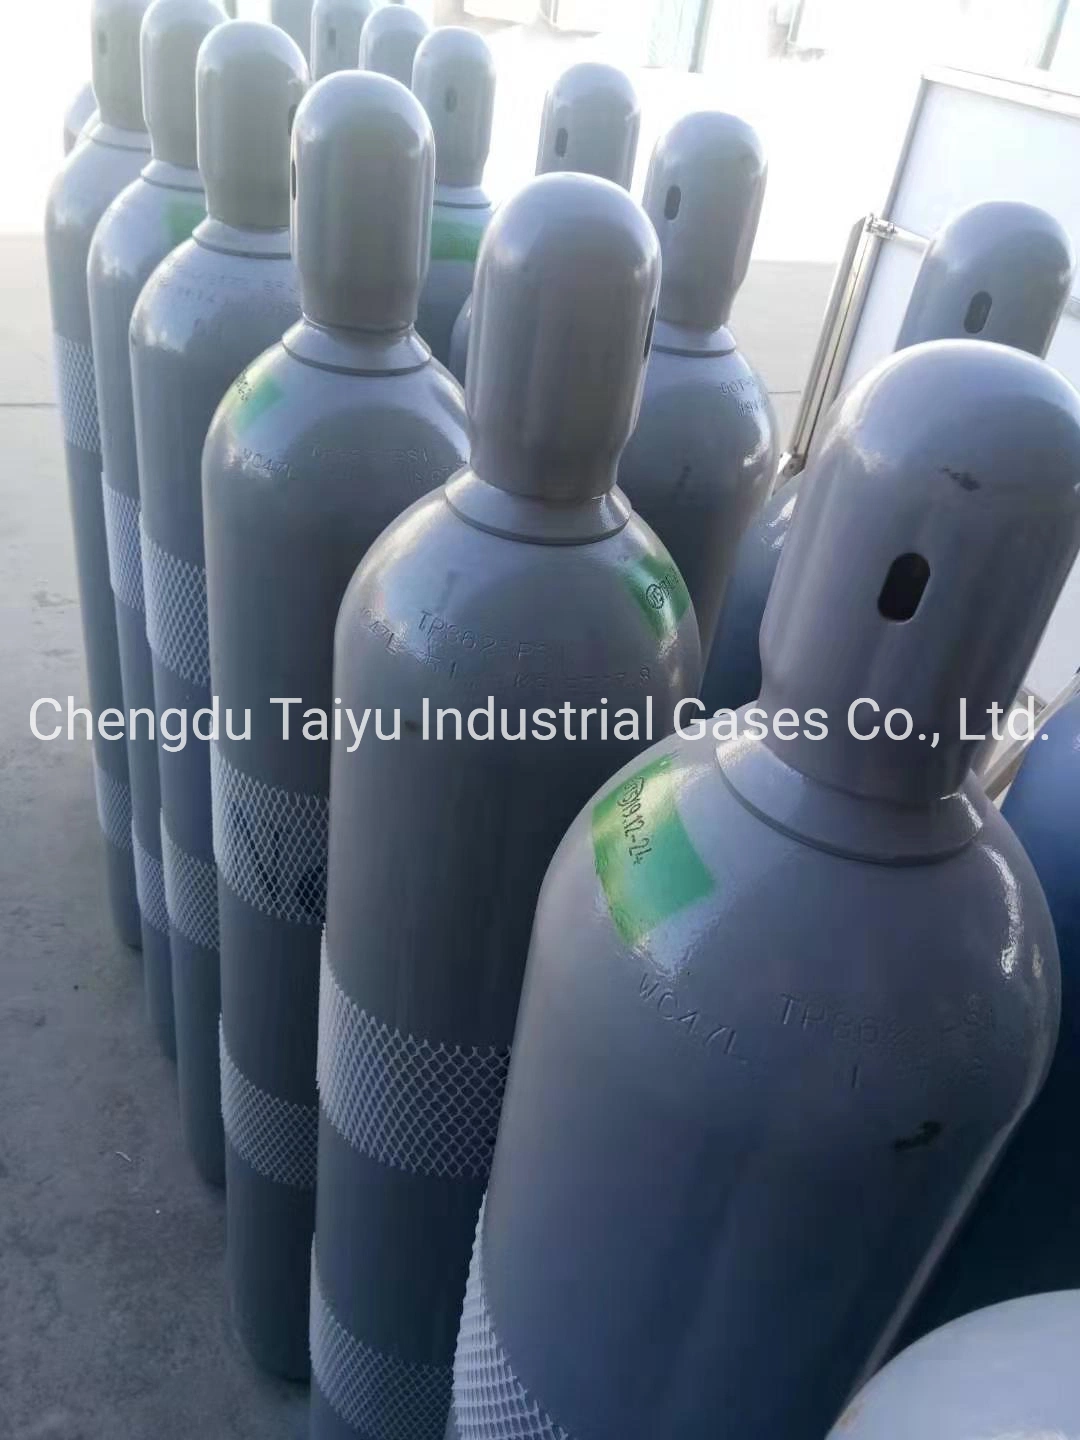 High Purity Industrial Grade NF3 Nitrogen Trifluoride Gas 99.996% Semiconductor Industry Etching Gas China Specialty Gas Price